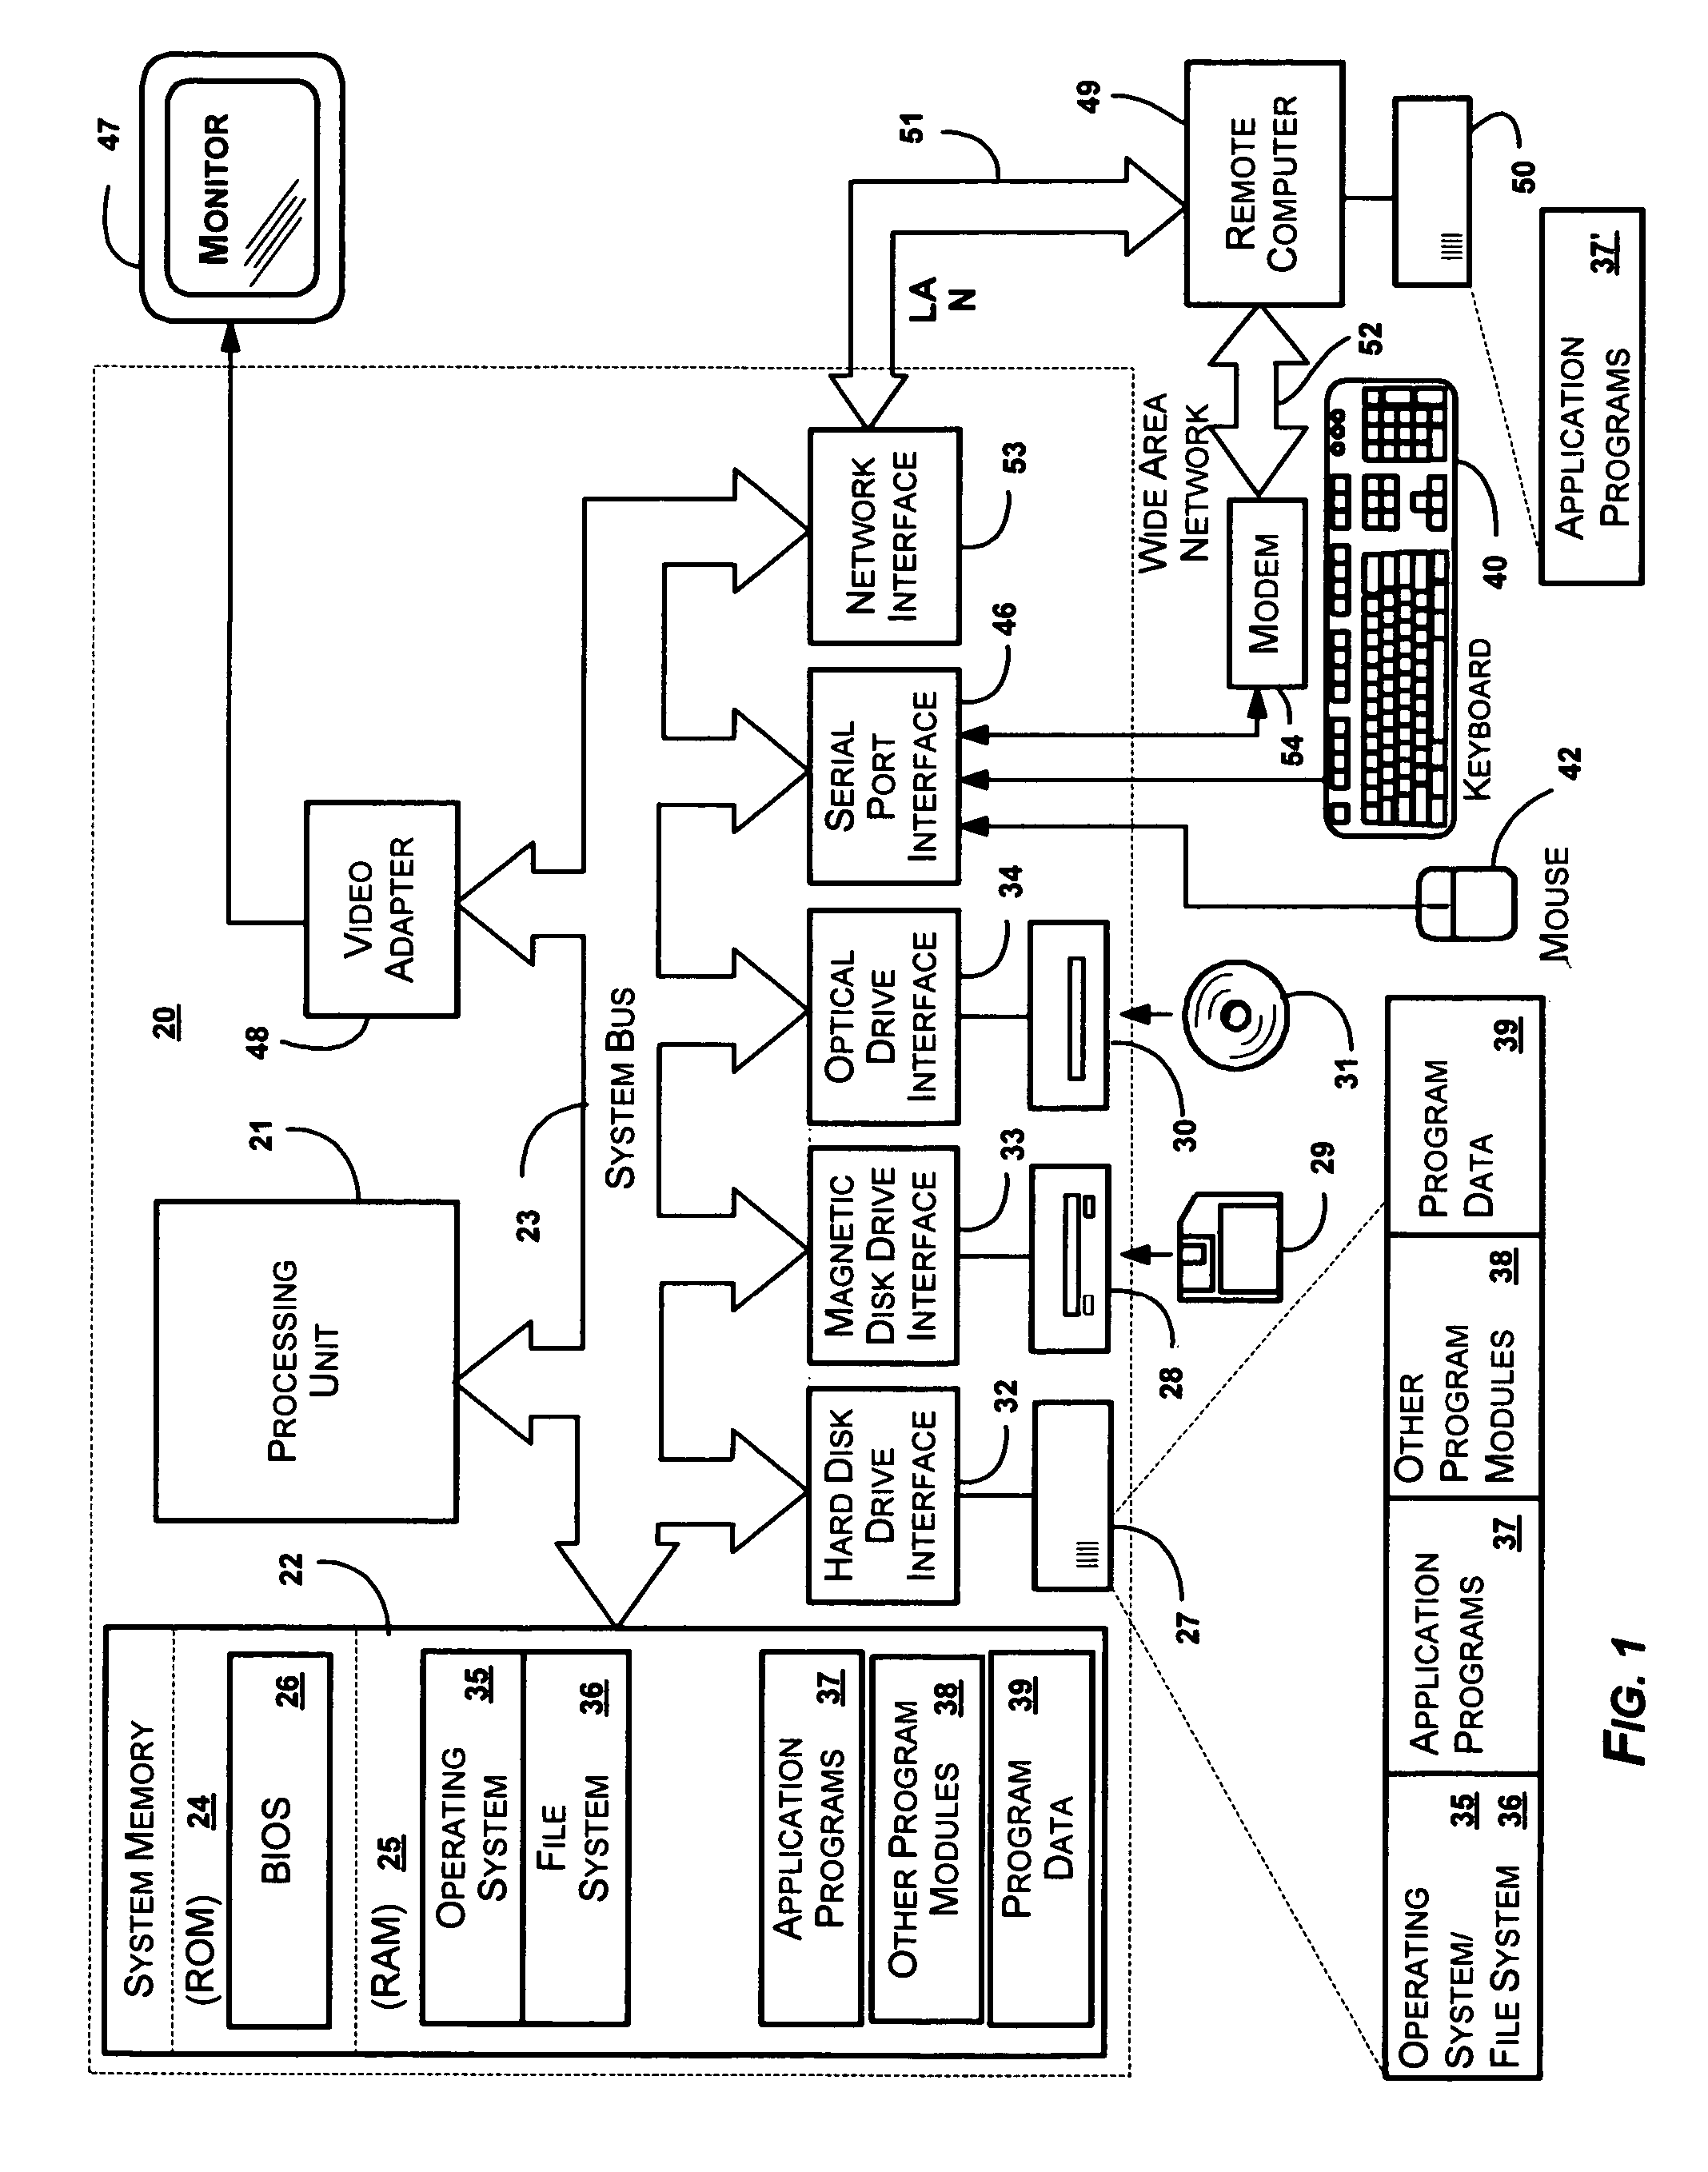 System and method for self-diagnosing system crashes